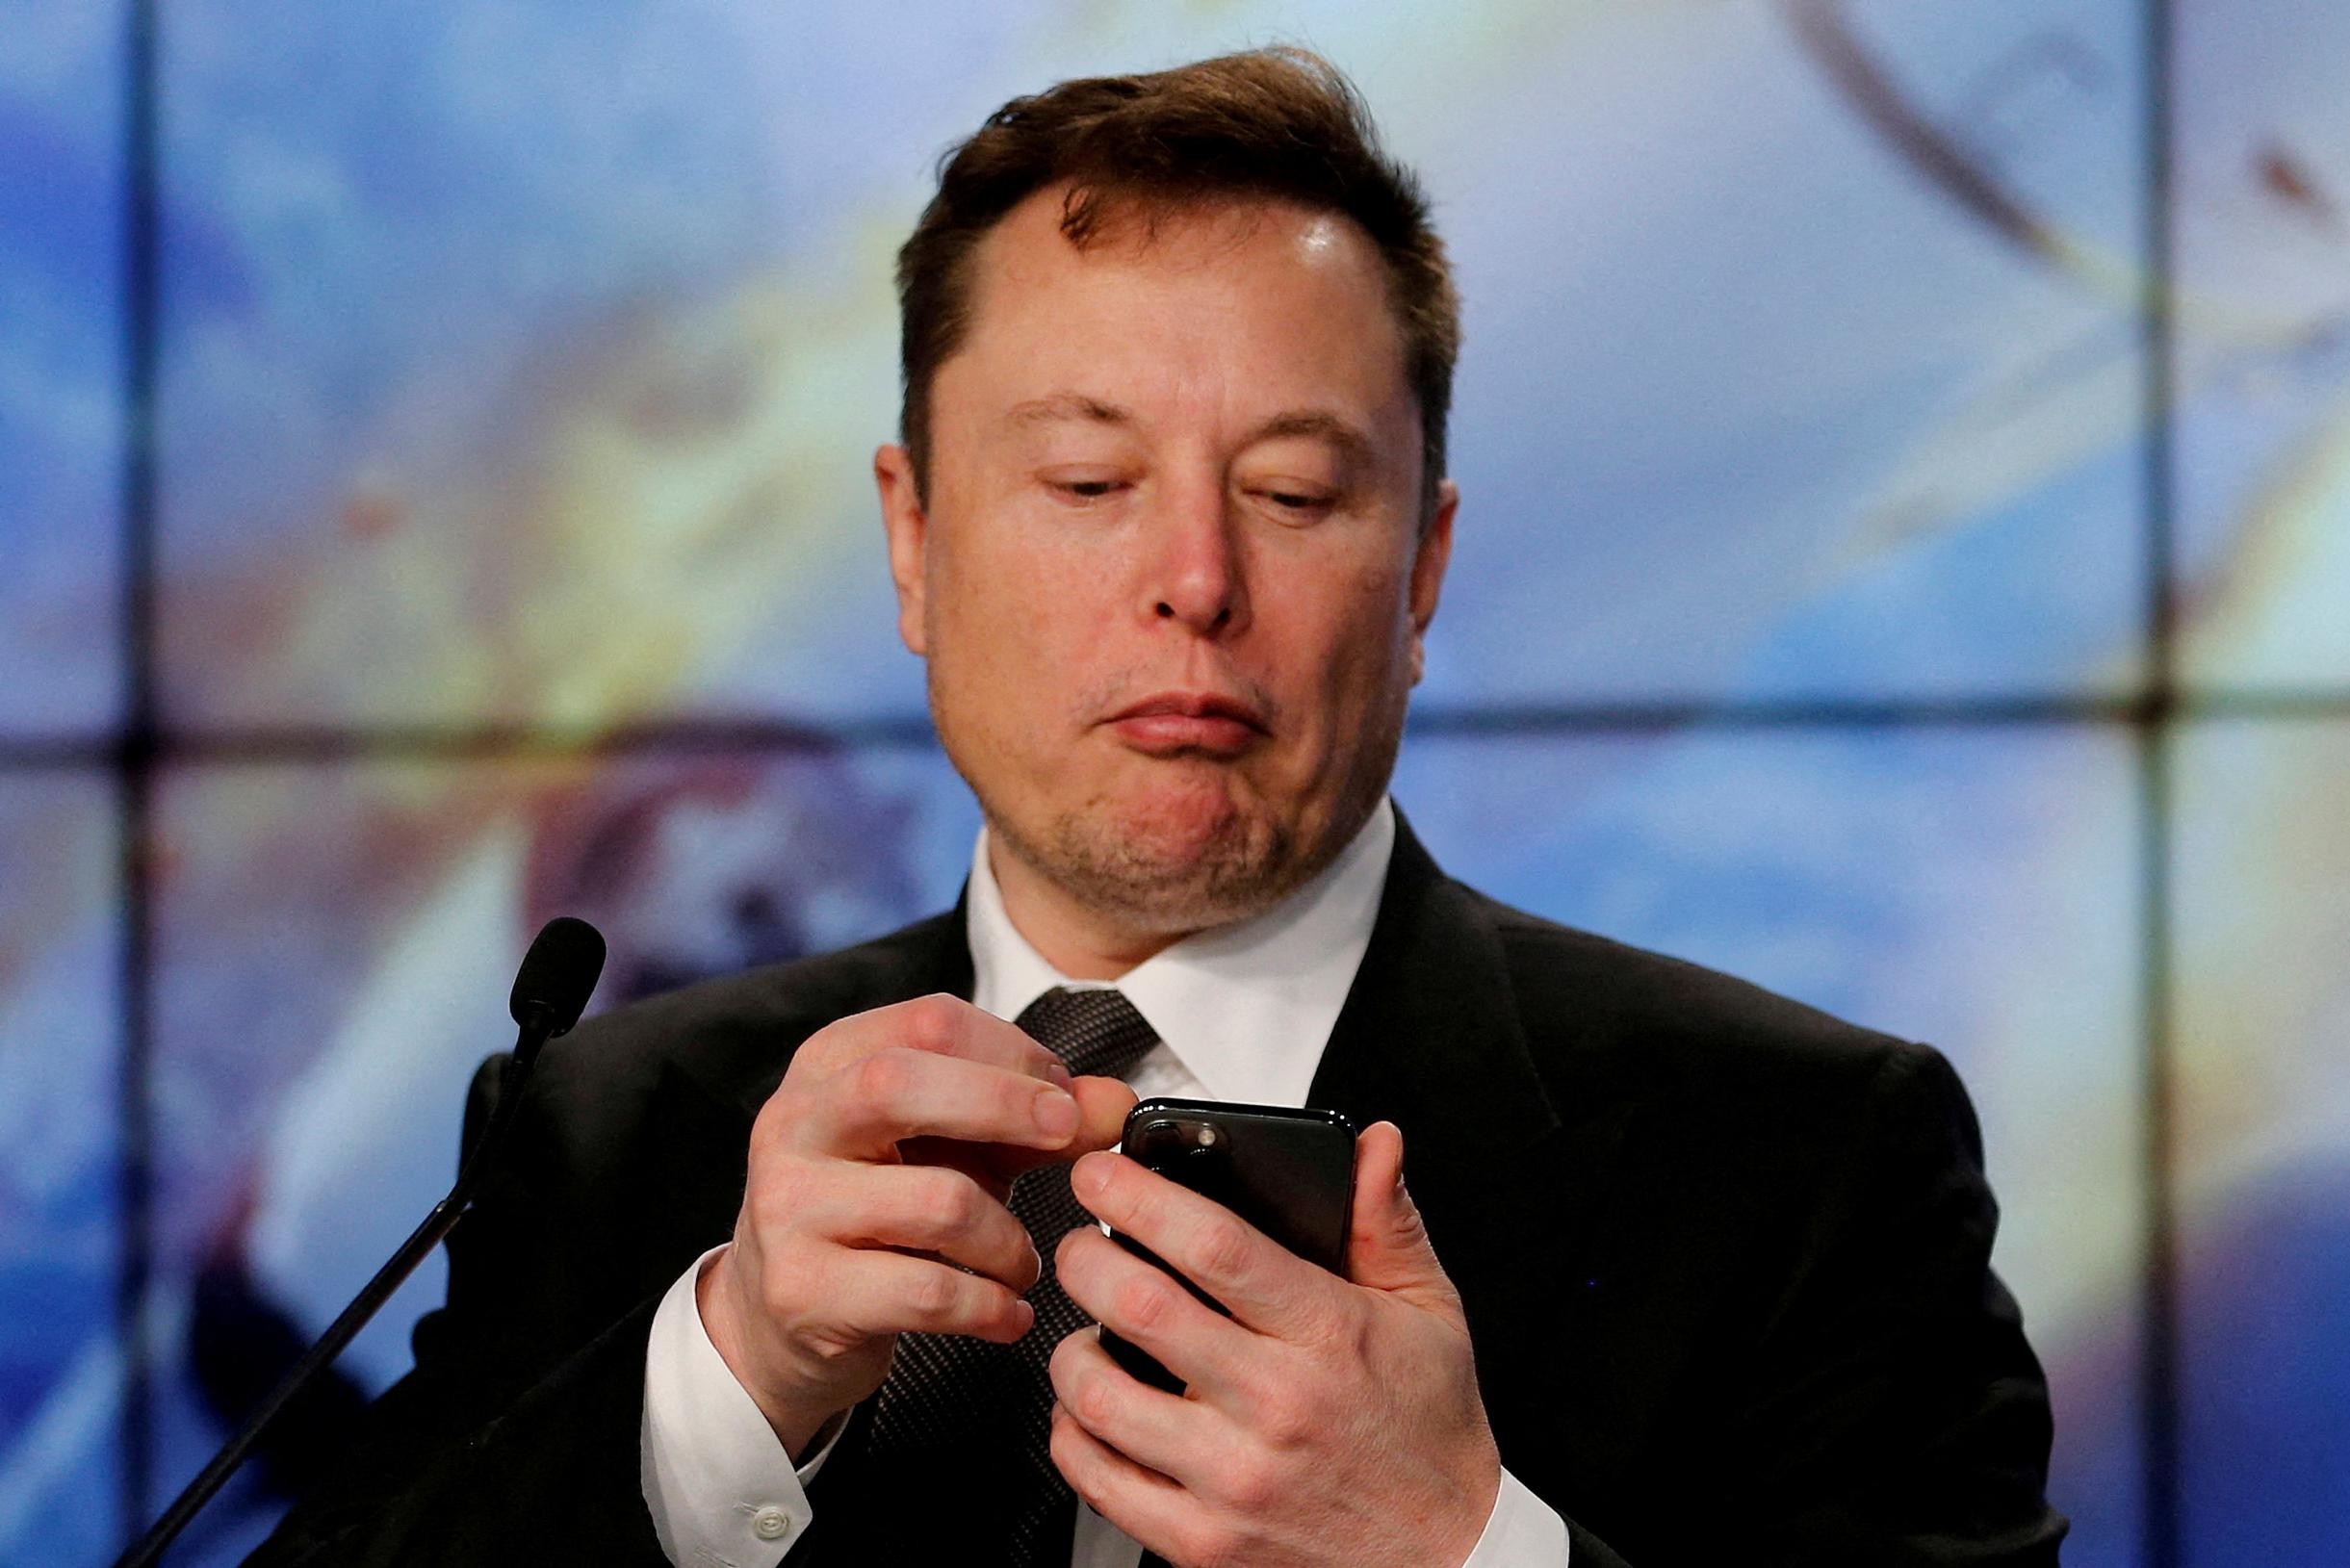 Elon Musk puts Twitter deal “temporarily on hold”: does he want to blow up takeover or is he looking for a better price?